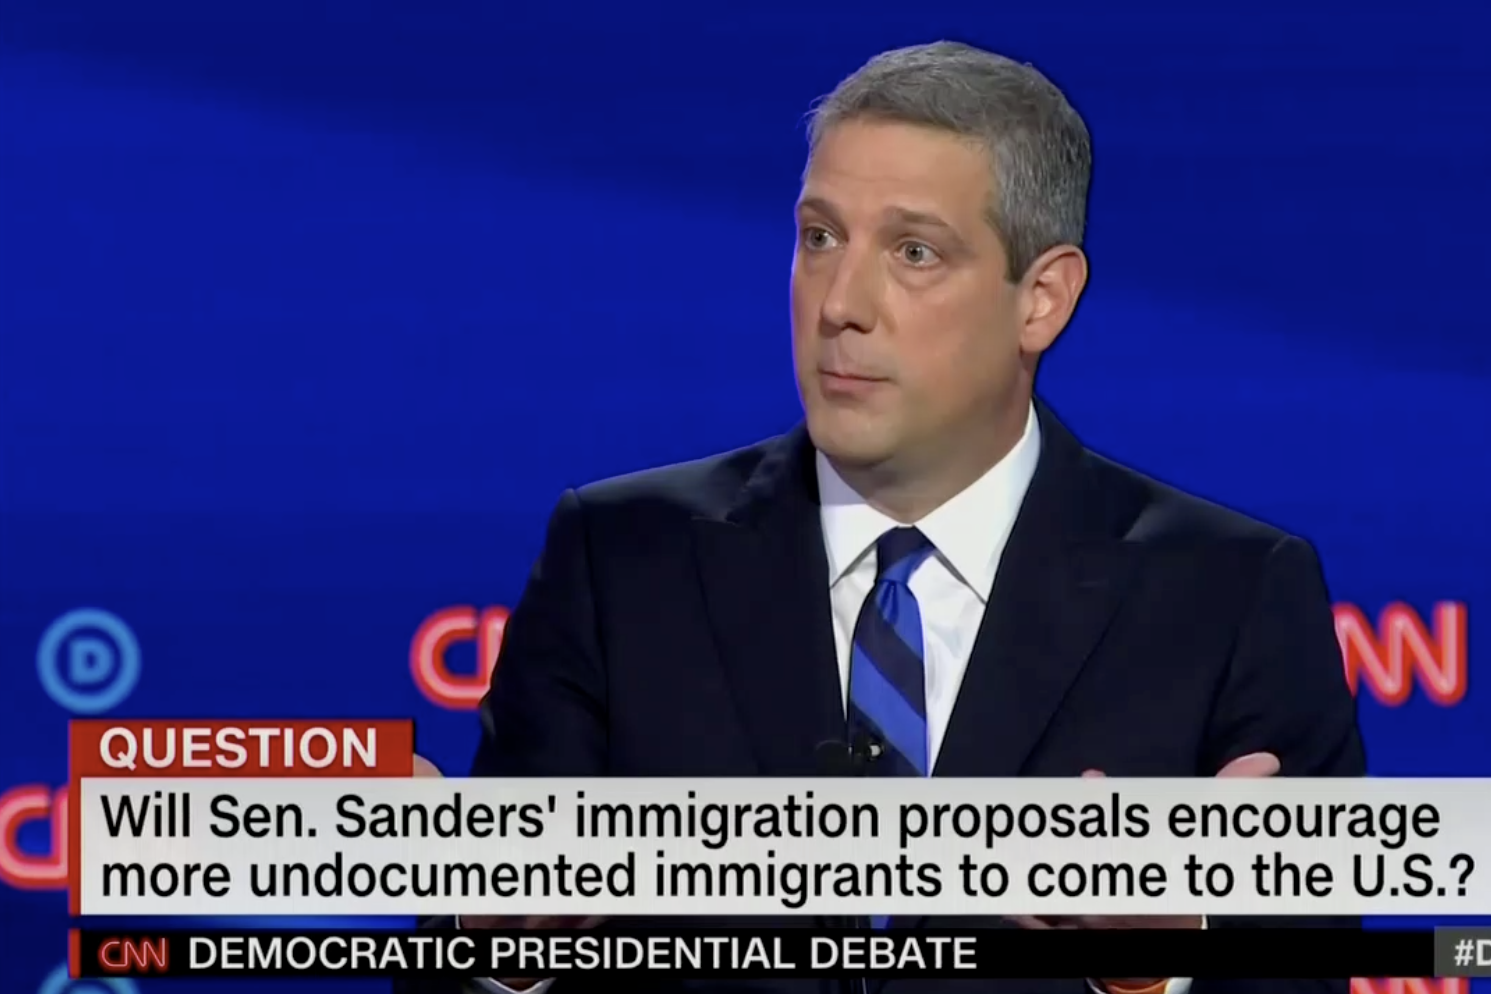 "Will Sen. Sanders' immigration proposals encourage more undocumented immigrants to come to the U.S.?"